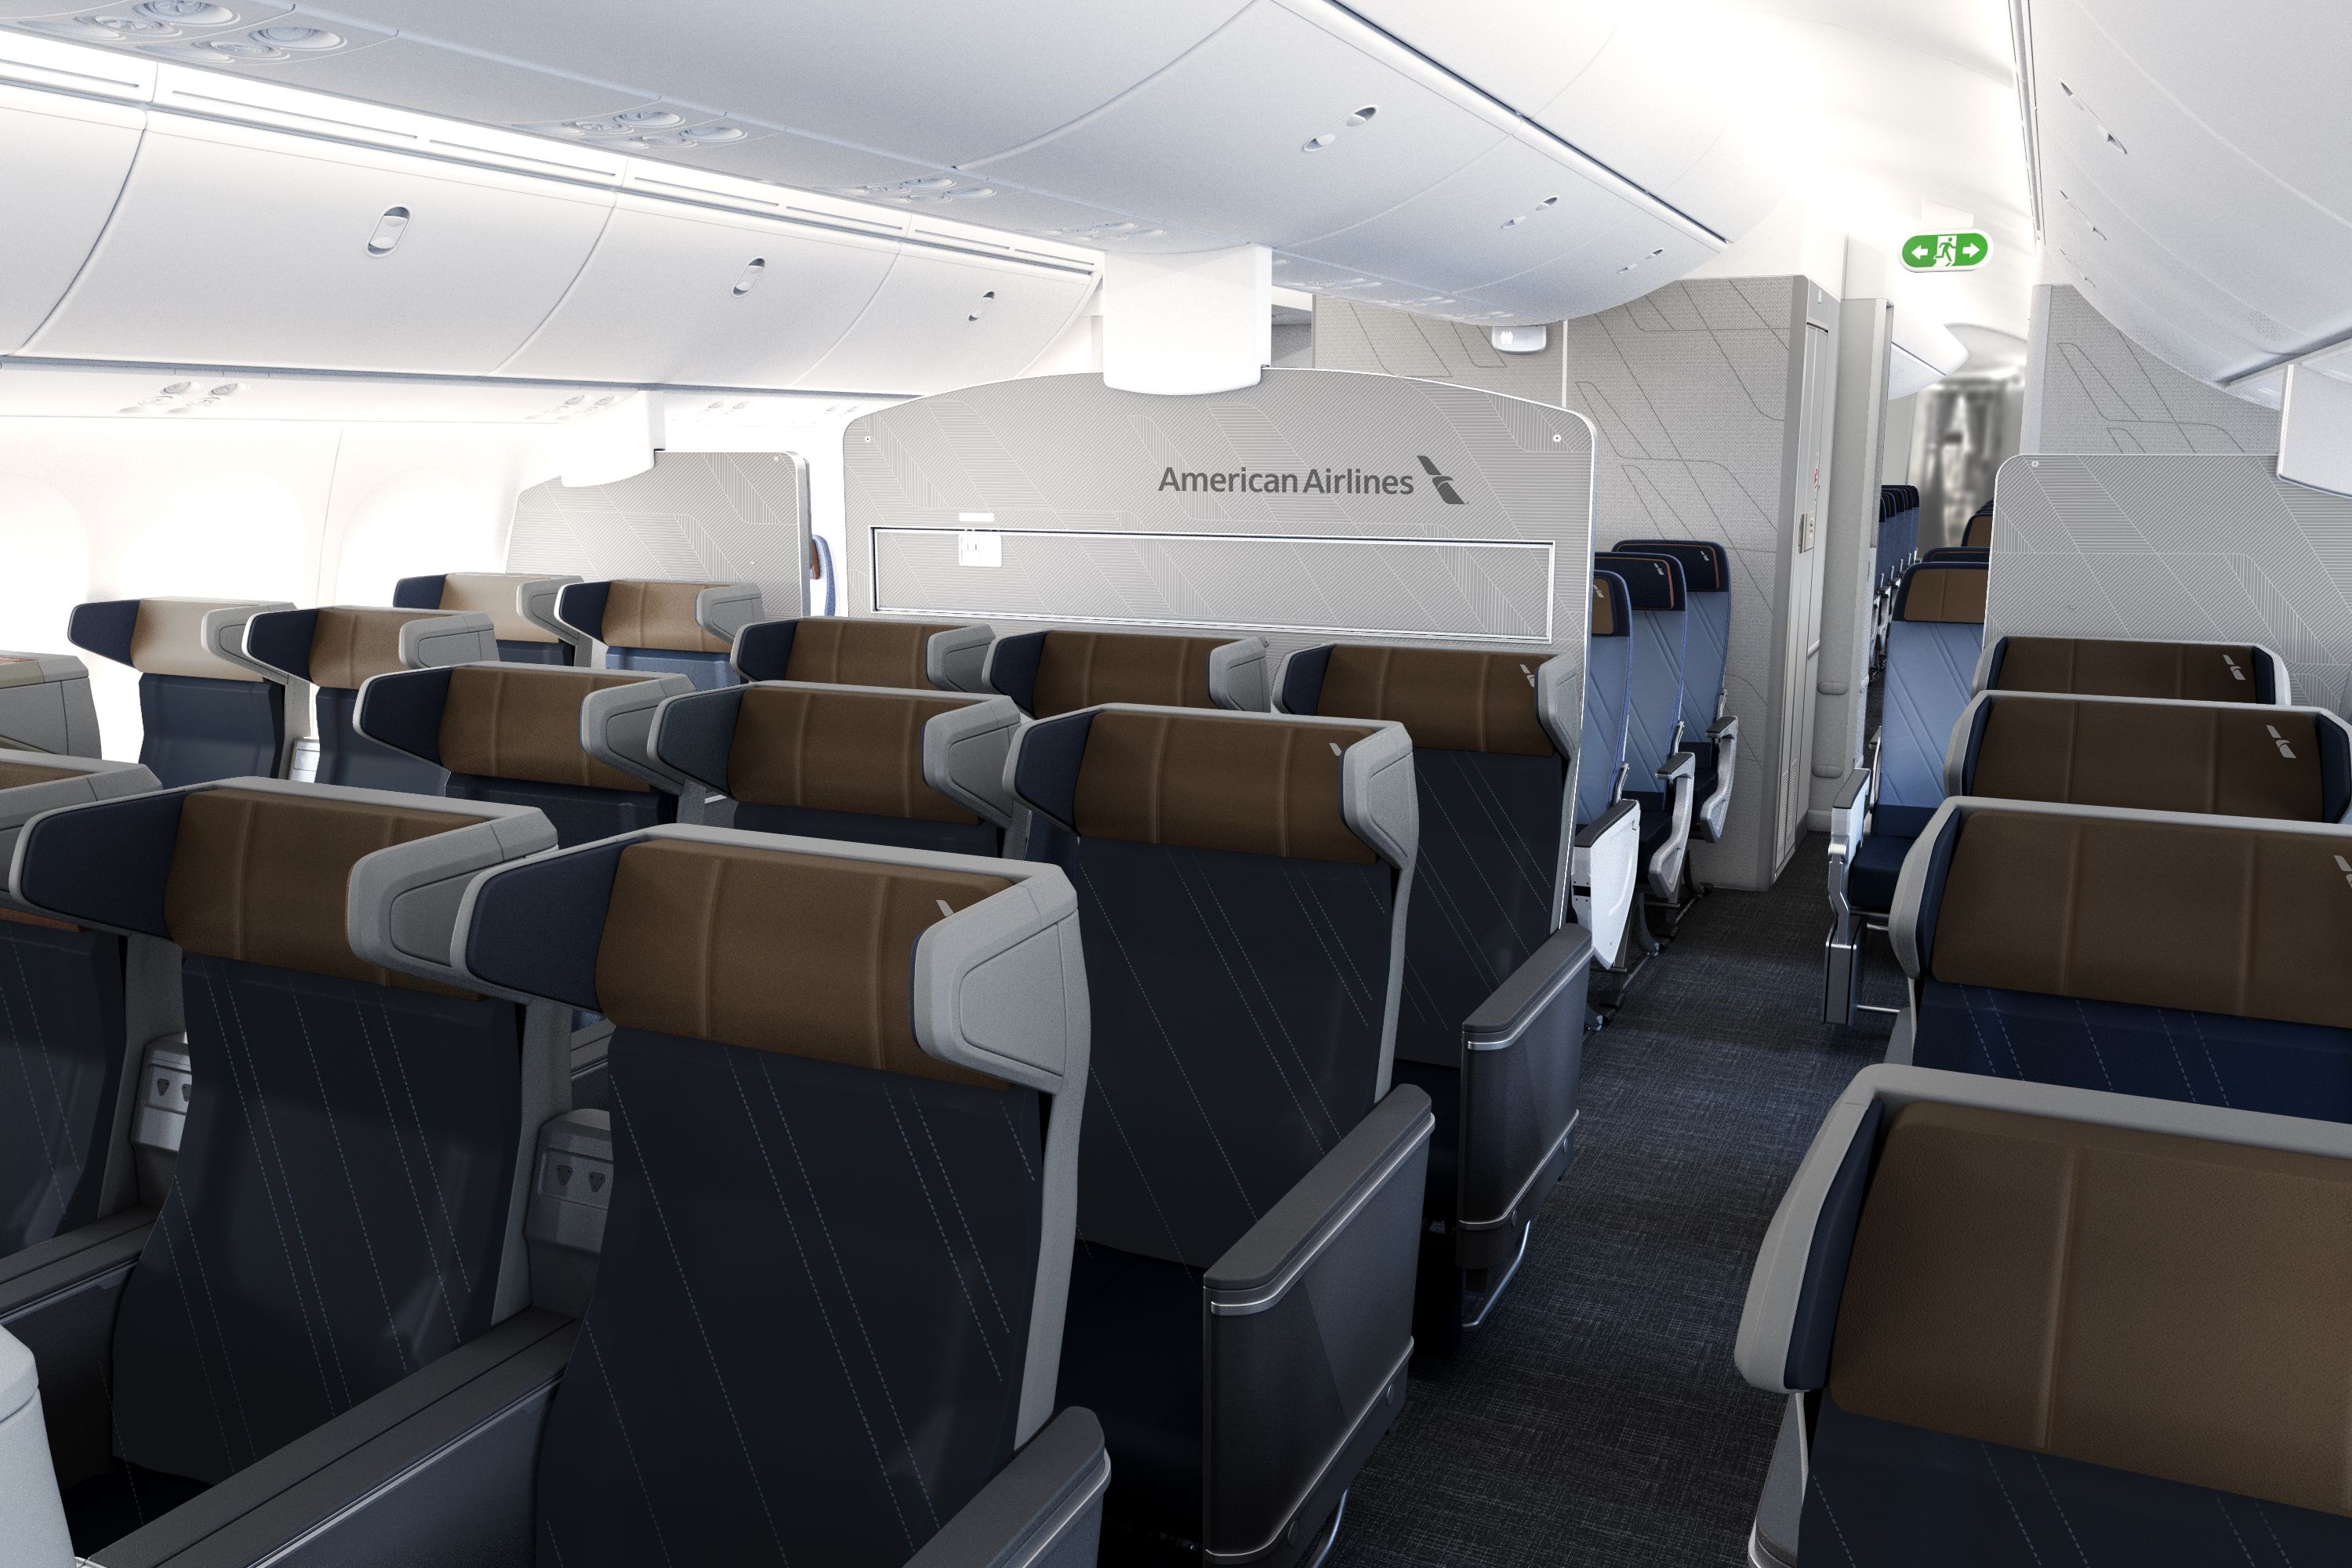 American Airlines new Premium Economy seating on the 787-9